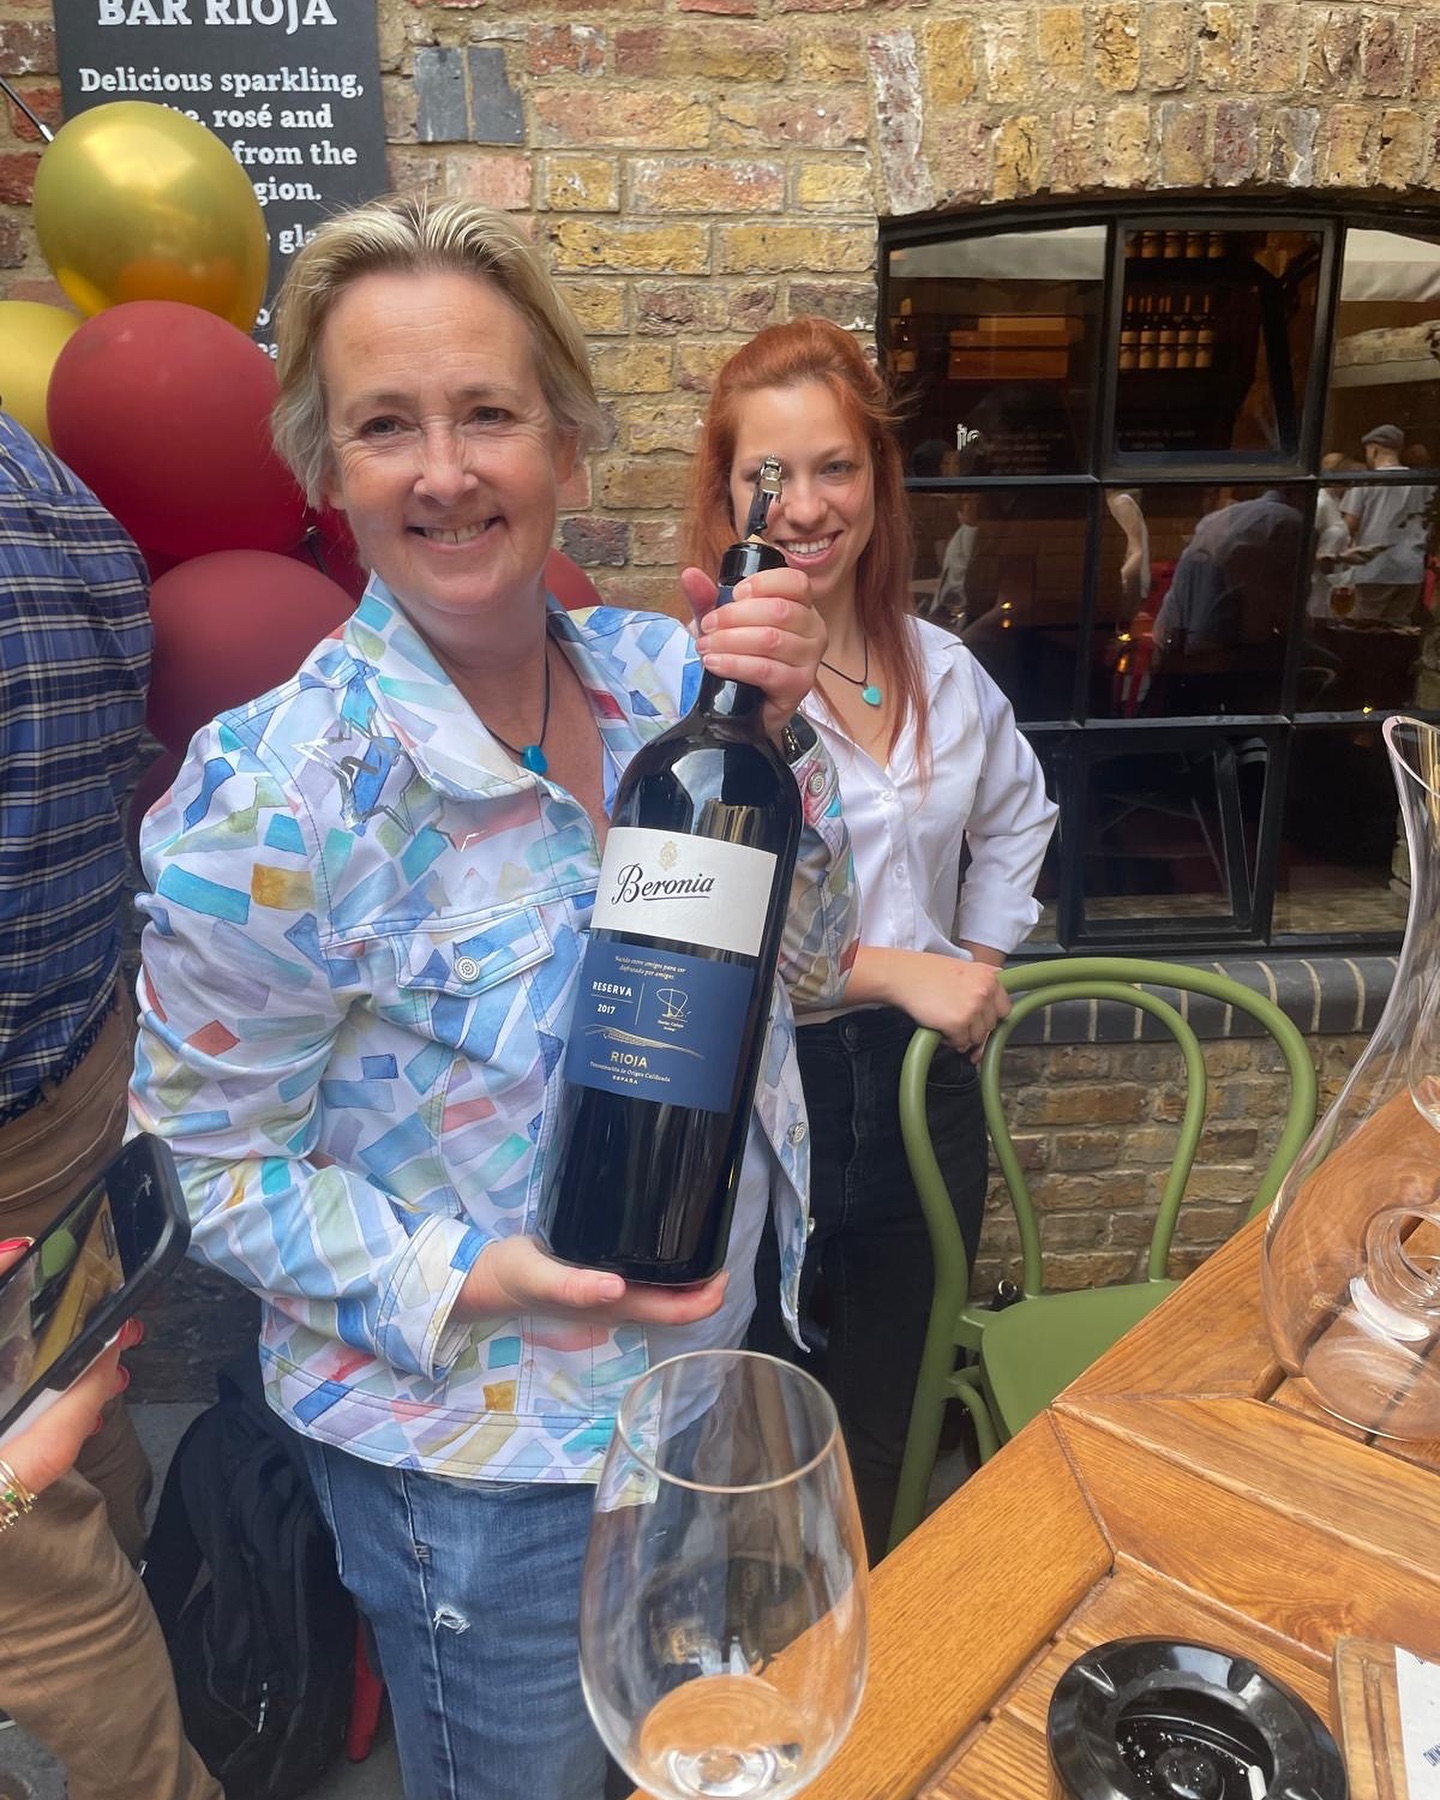 Celebrating @bar.rioja 1st birthday party is as good a reason as any to open up giant bottles of Beronia!

Massive thanks to the team @caminolondon team and all who attended to make it such a great evening. 

Cheers to a great year and many more to come! 🍷

#rioja #barrioja #londonrestaurants #londonnightlife #beronia #spanishwine #spanishfood #tapas #wineandtapas @beronia_uk @melissa_draycott @richard.bigg